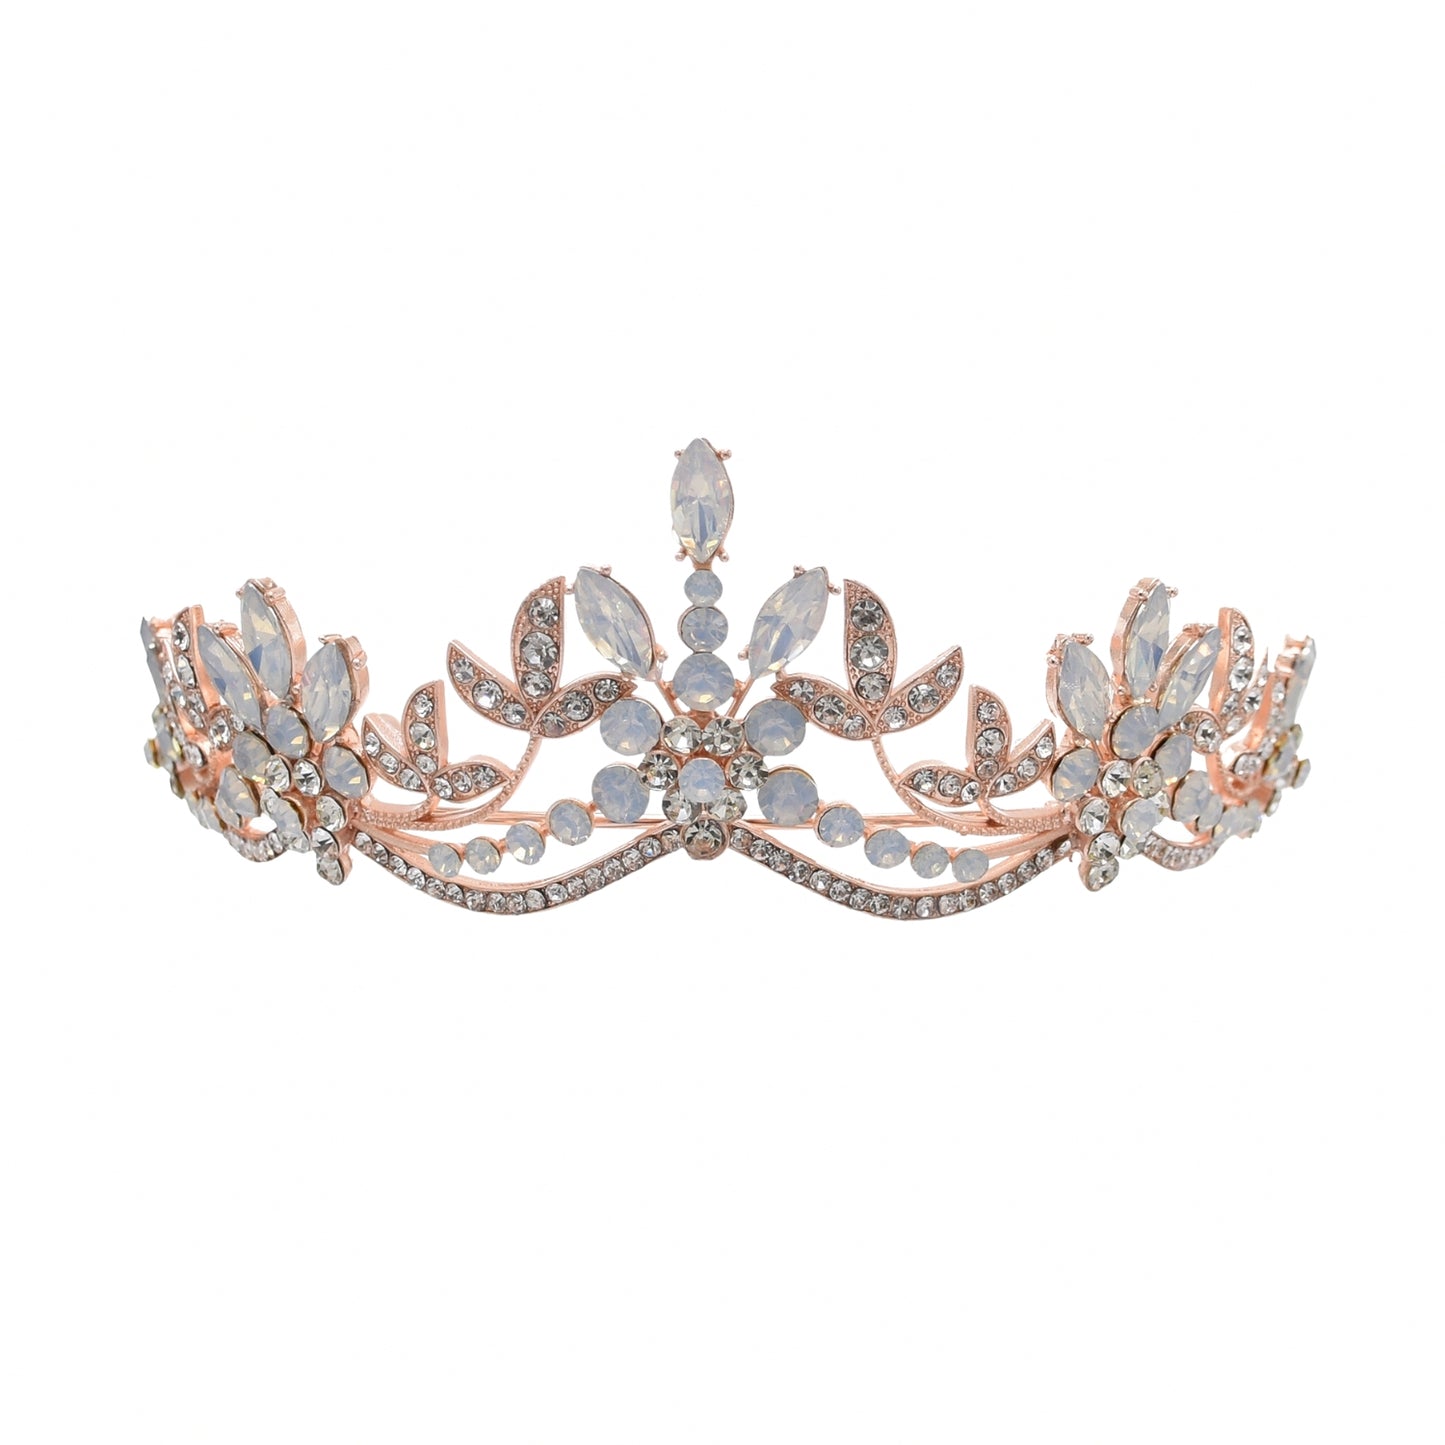 Queen Crown and Tiaras Princess Crown for Women and Girls, Wedding Gift, Birthday party decoration